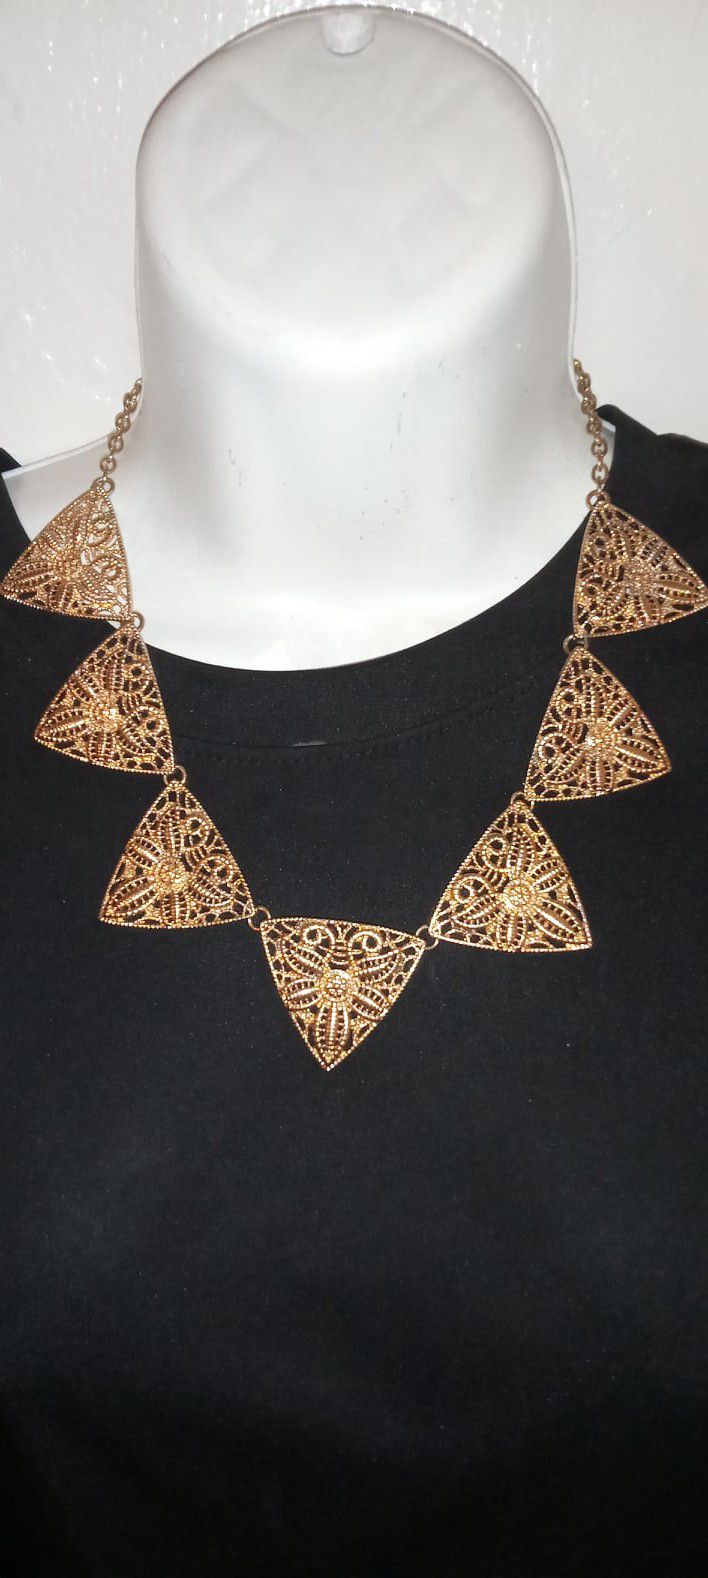 Gold Tone Necklace Choker Necklace Is Adjustable